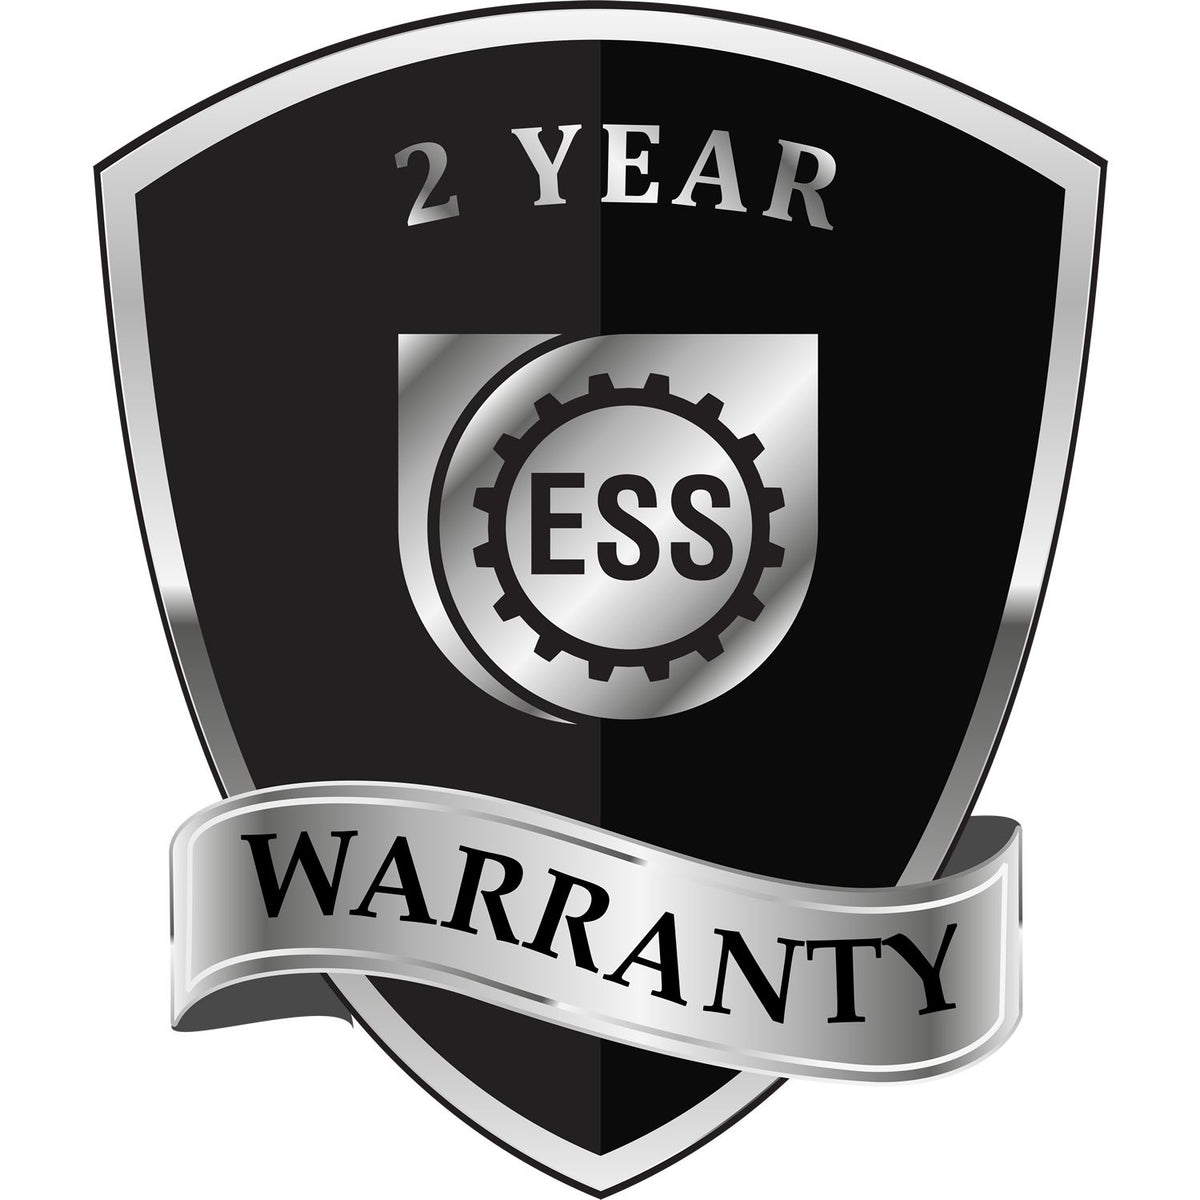 A black and silver badge or emblem showing warranty information for the Hybrid Utah Architect Seal